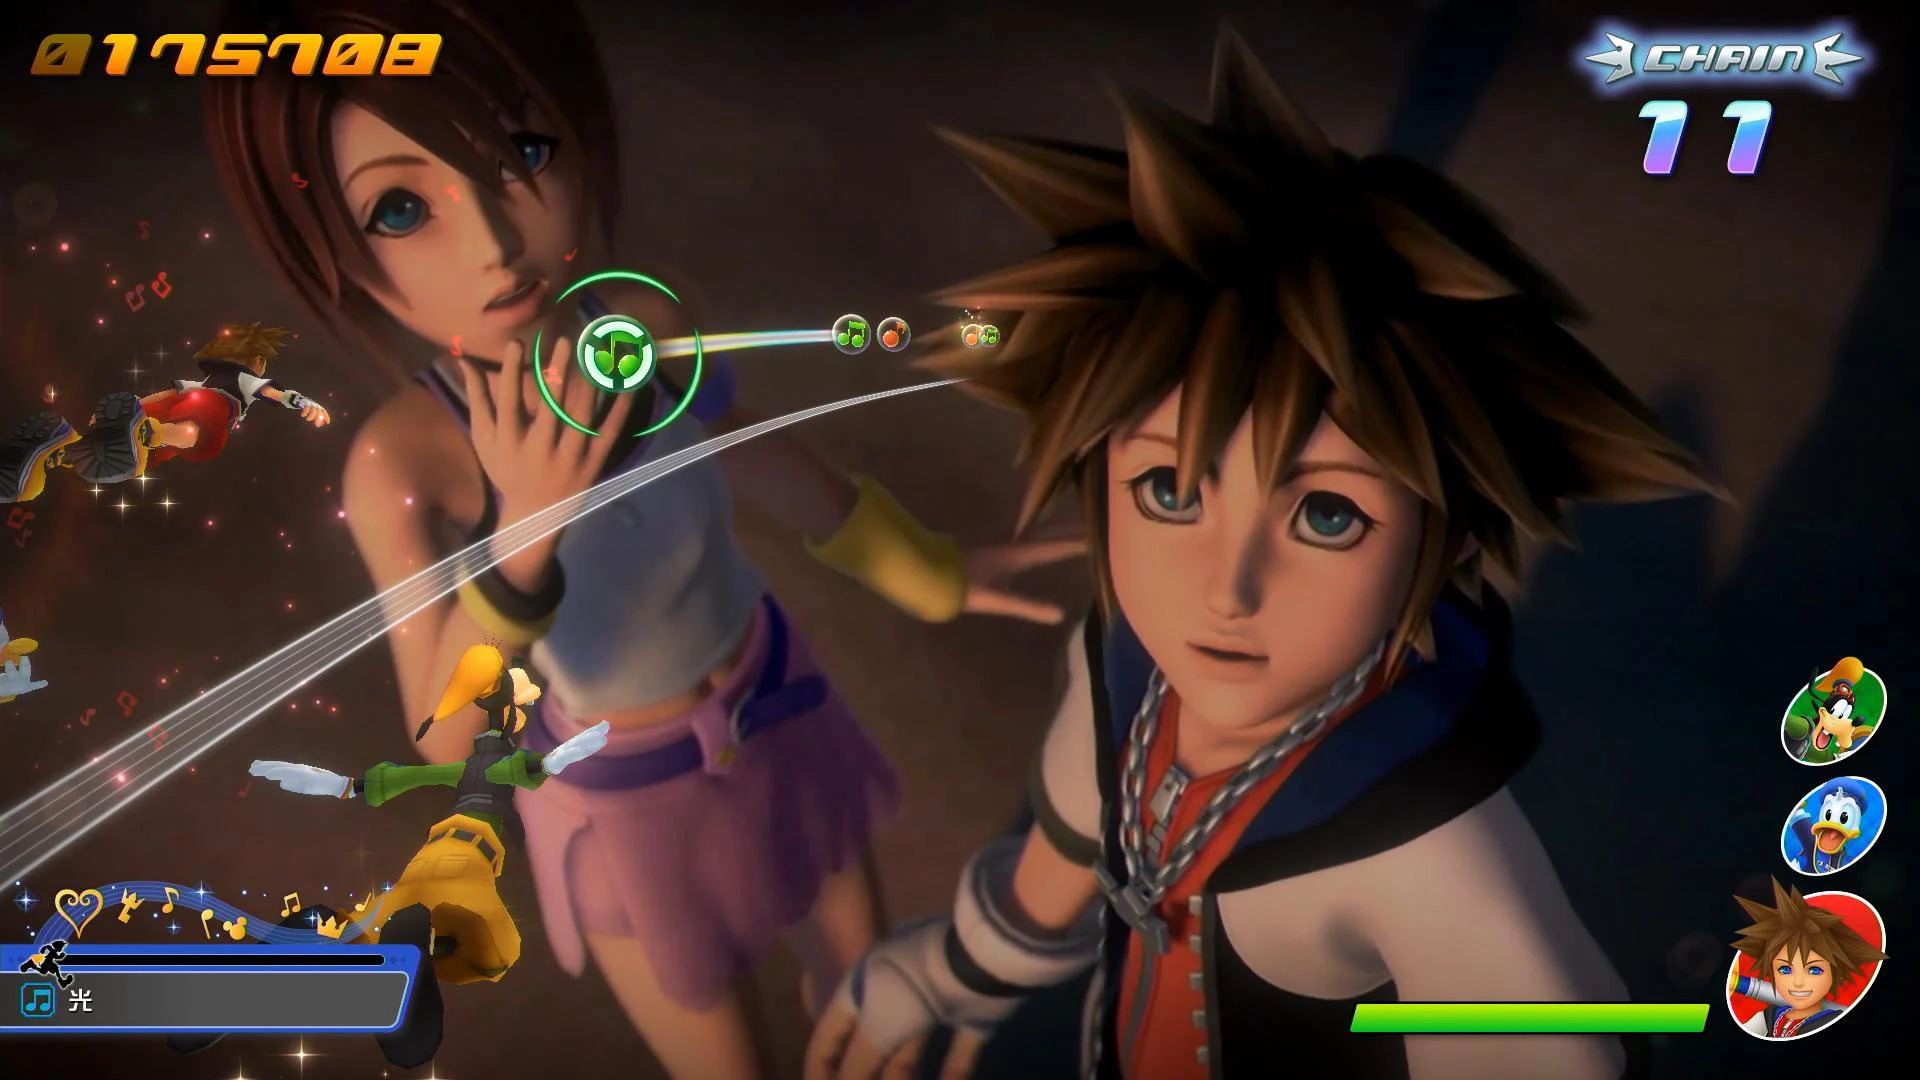 instal the new version for windows KINGDOM HEARTS Melody of Memory